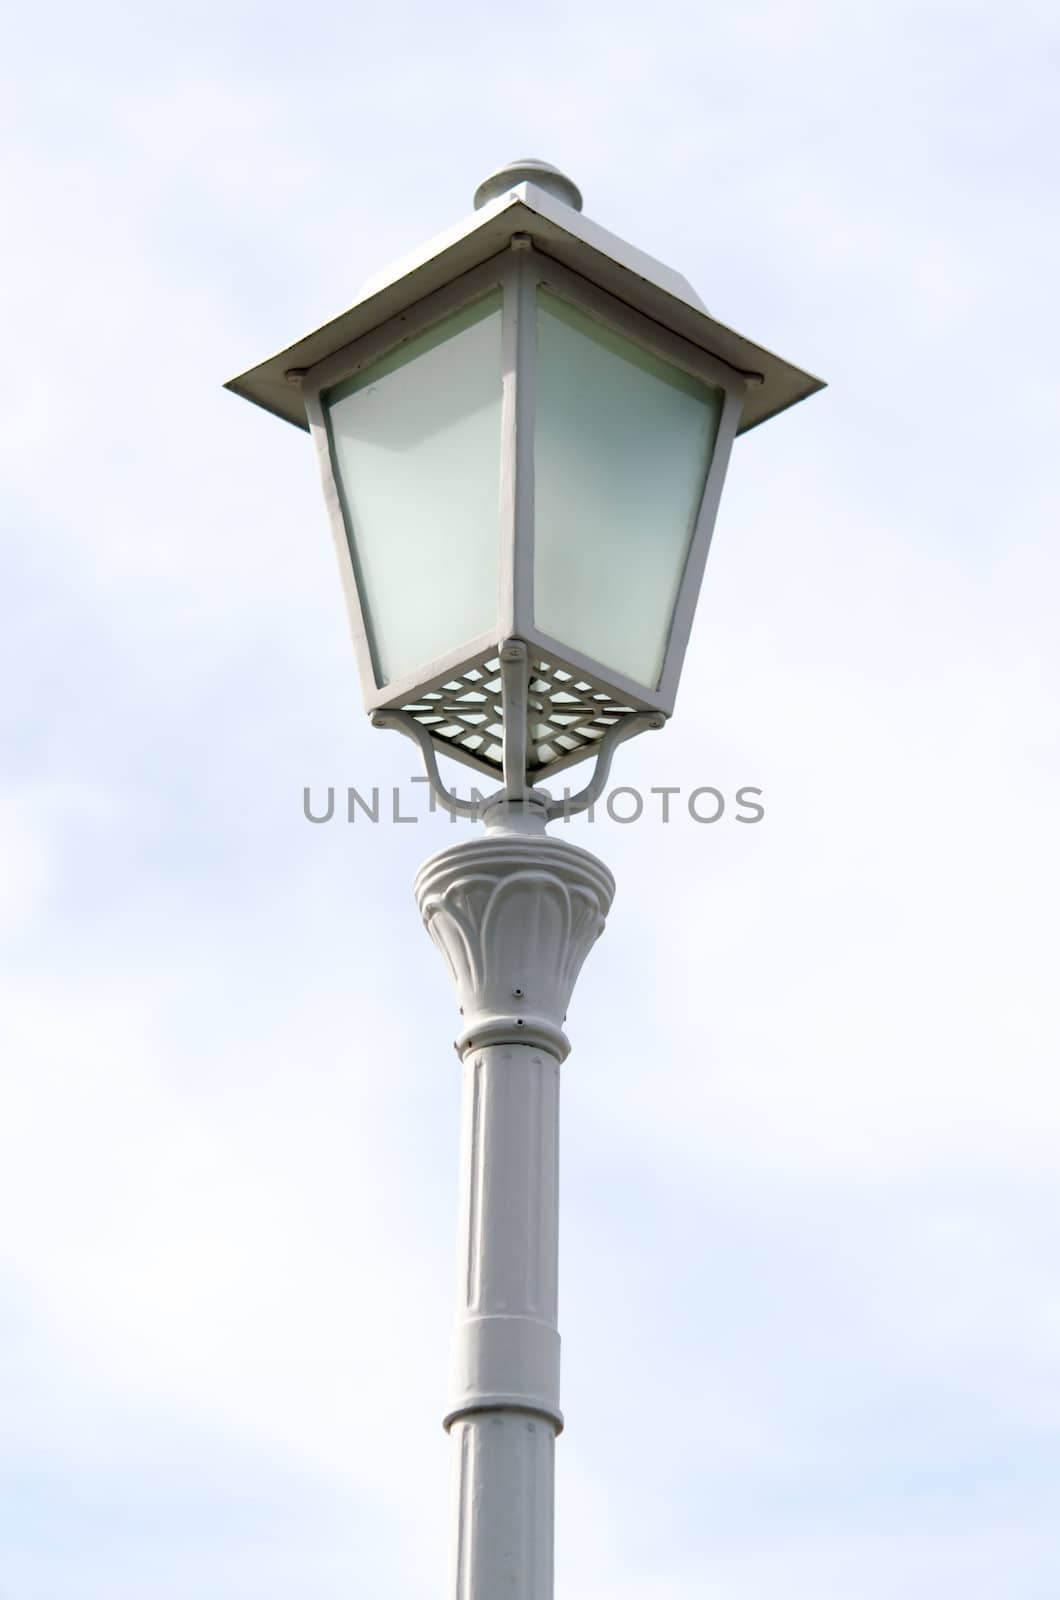 A single hooded street light with blue sky background